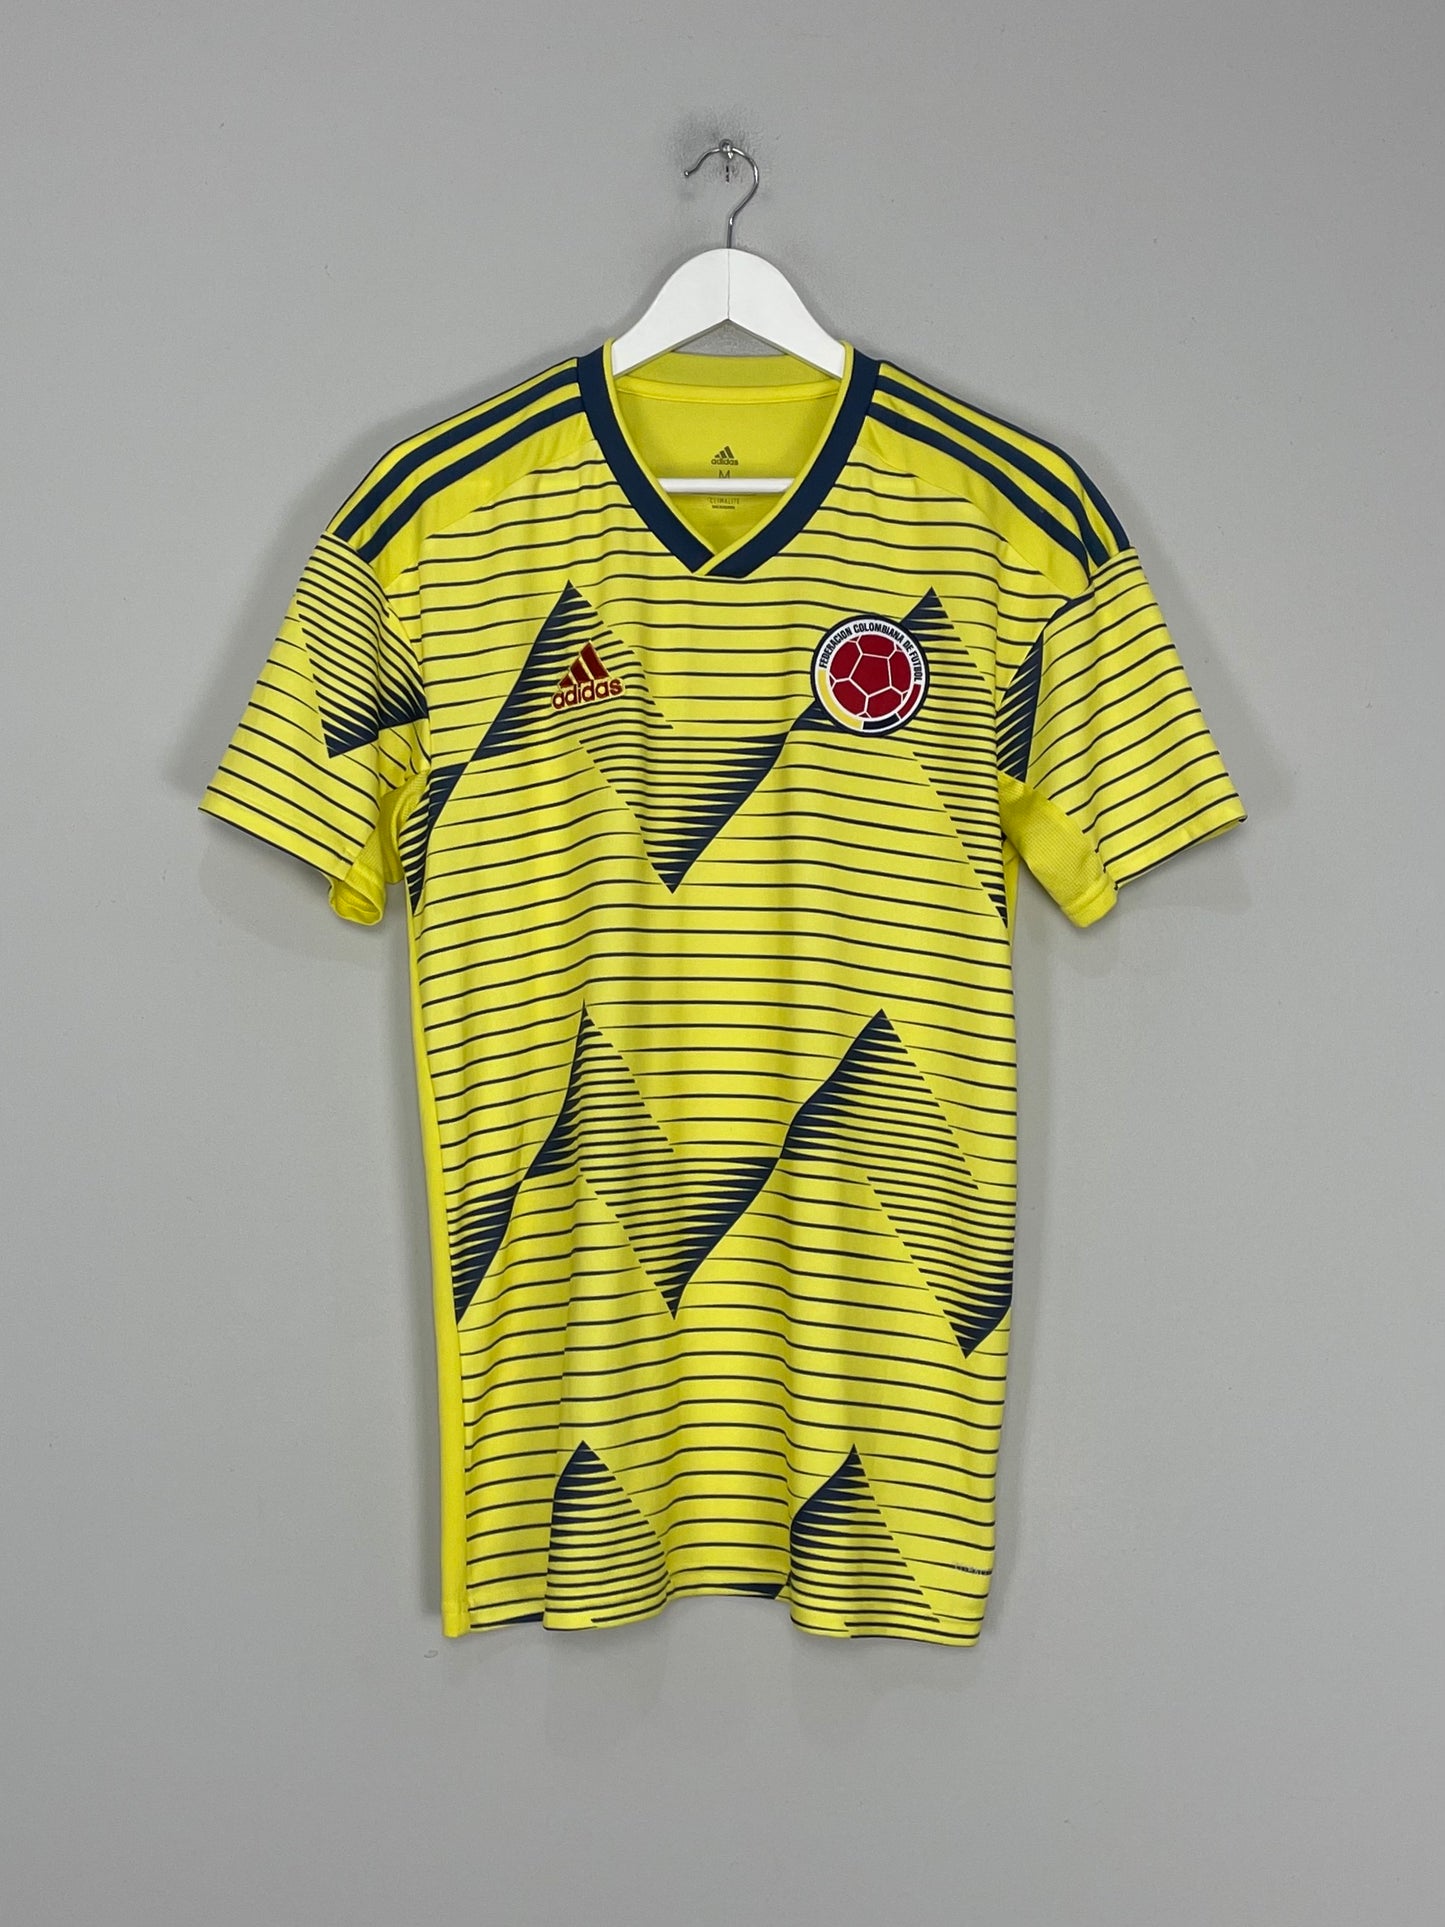 2019/20 COLOMBIA HOME SHIRT (M) ADIDAS